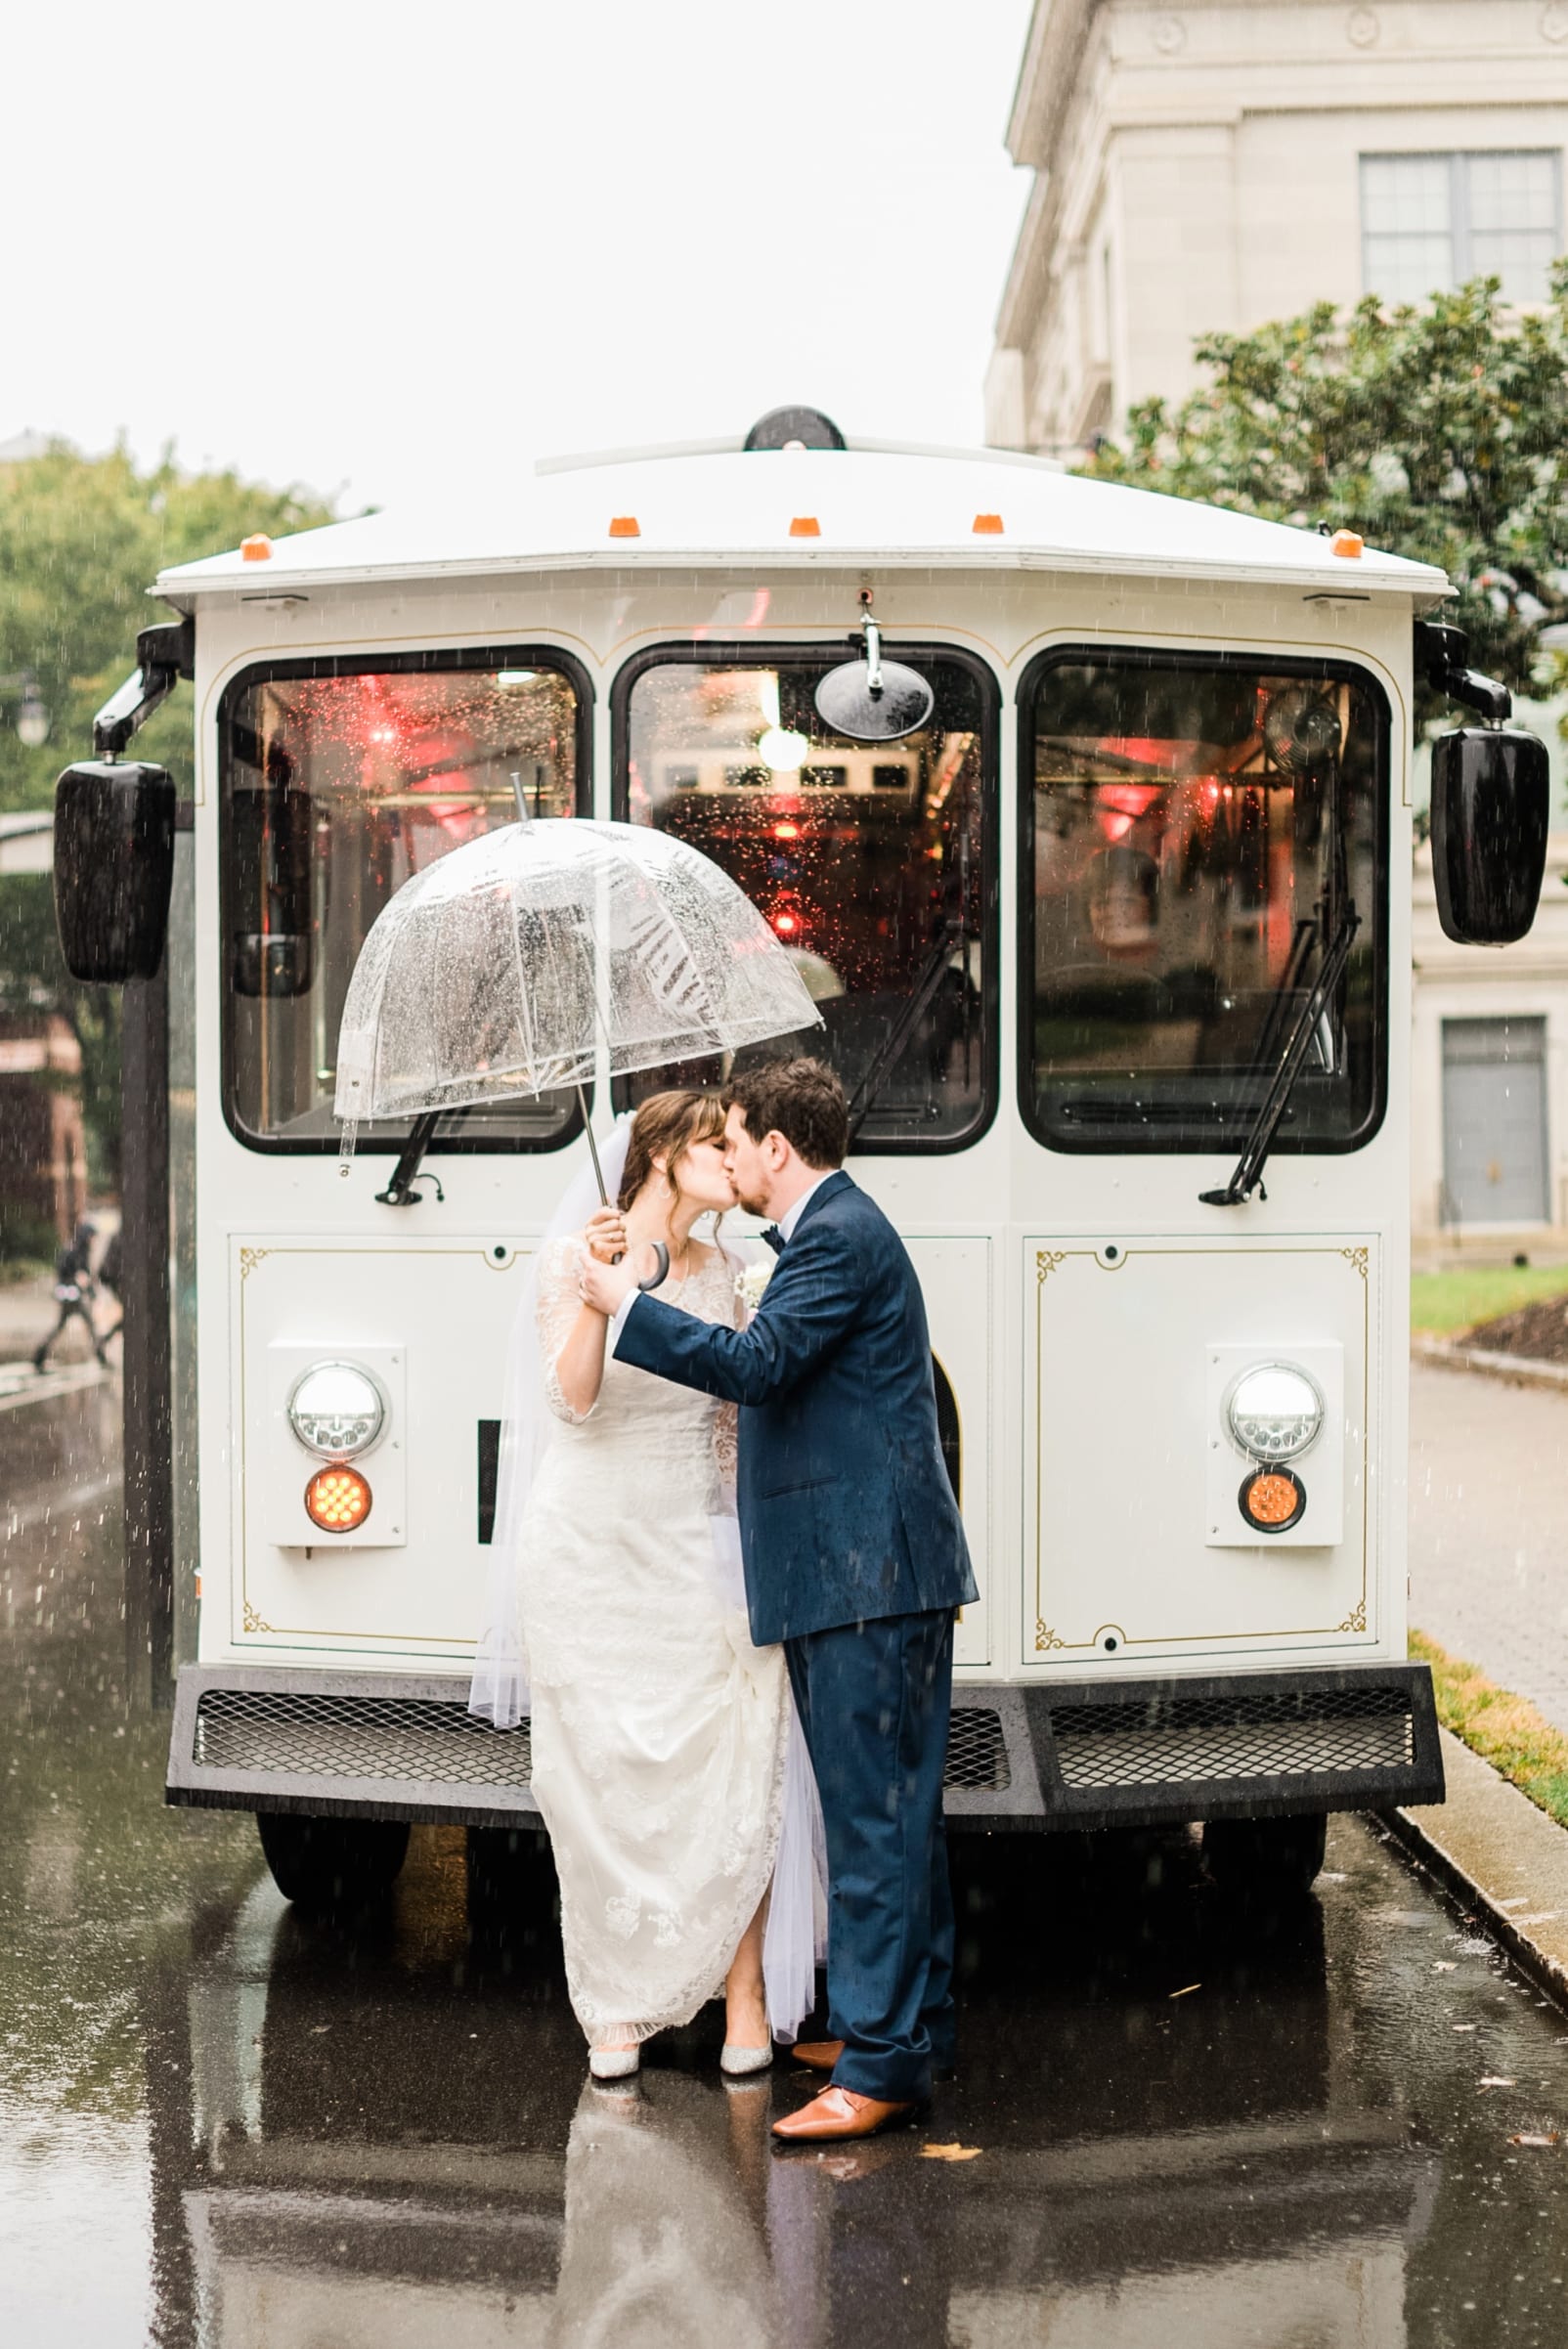 The great Raleigh trolley bride and groom kissing in front of his under a clear umbrella photo